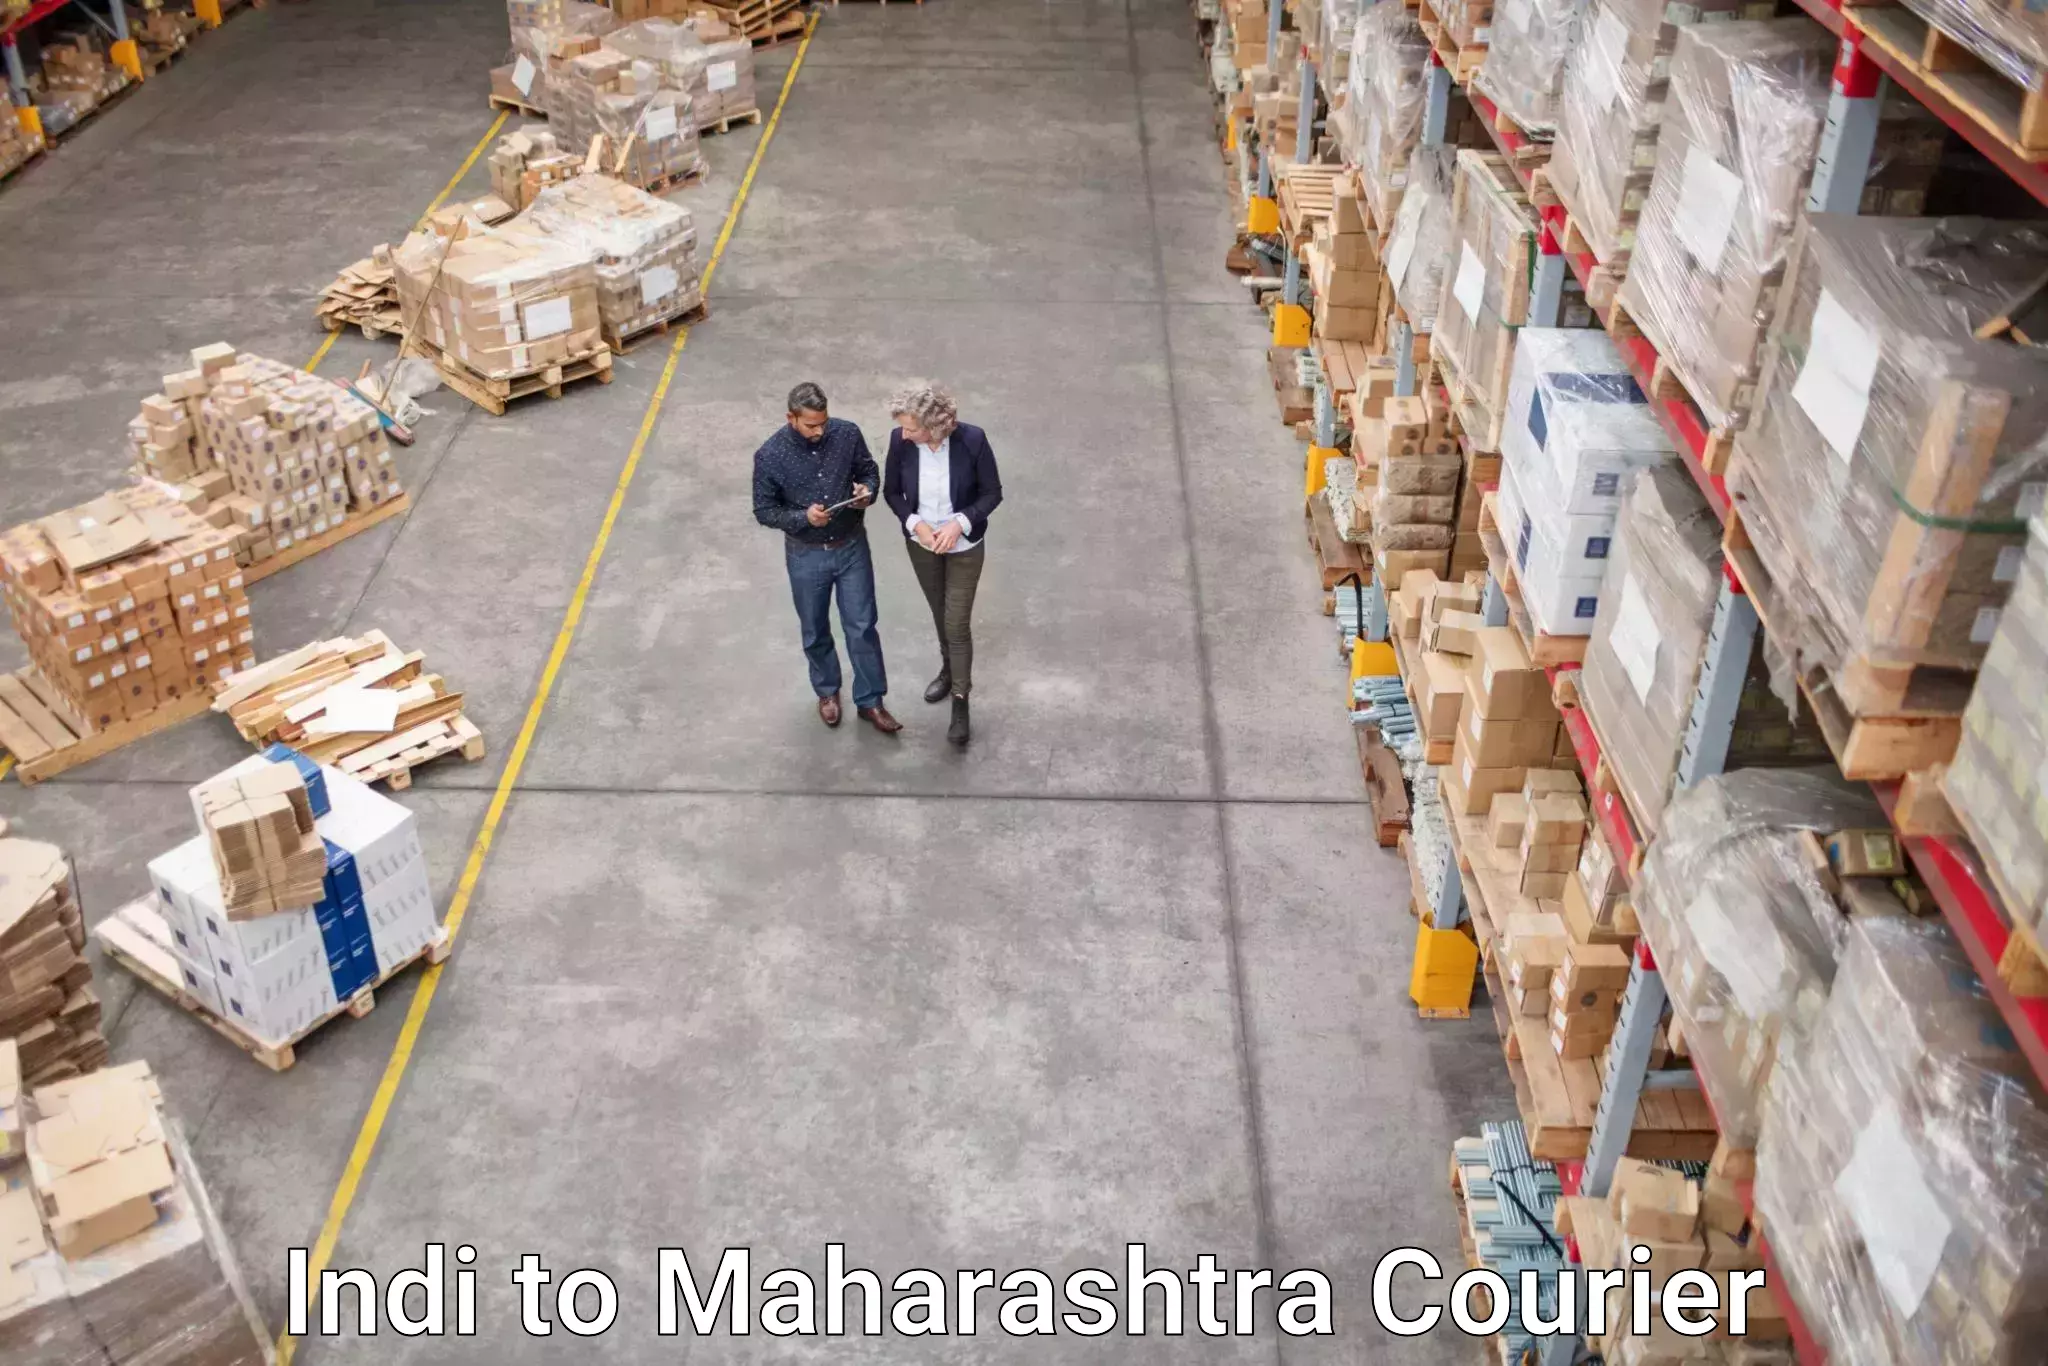 State-of-the-art courier technology Indi to Gadchandur